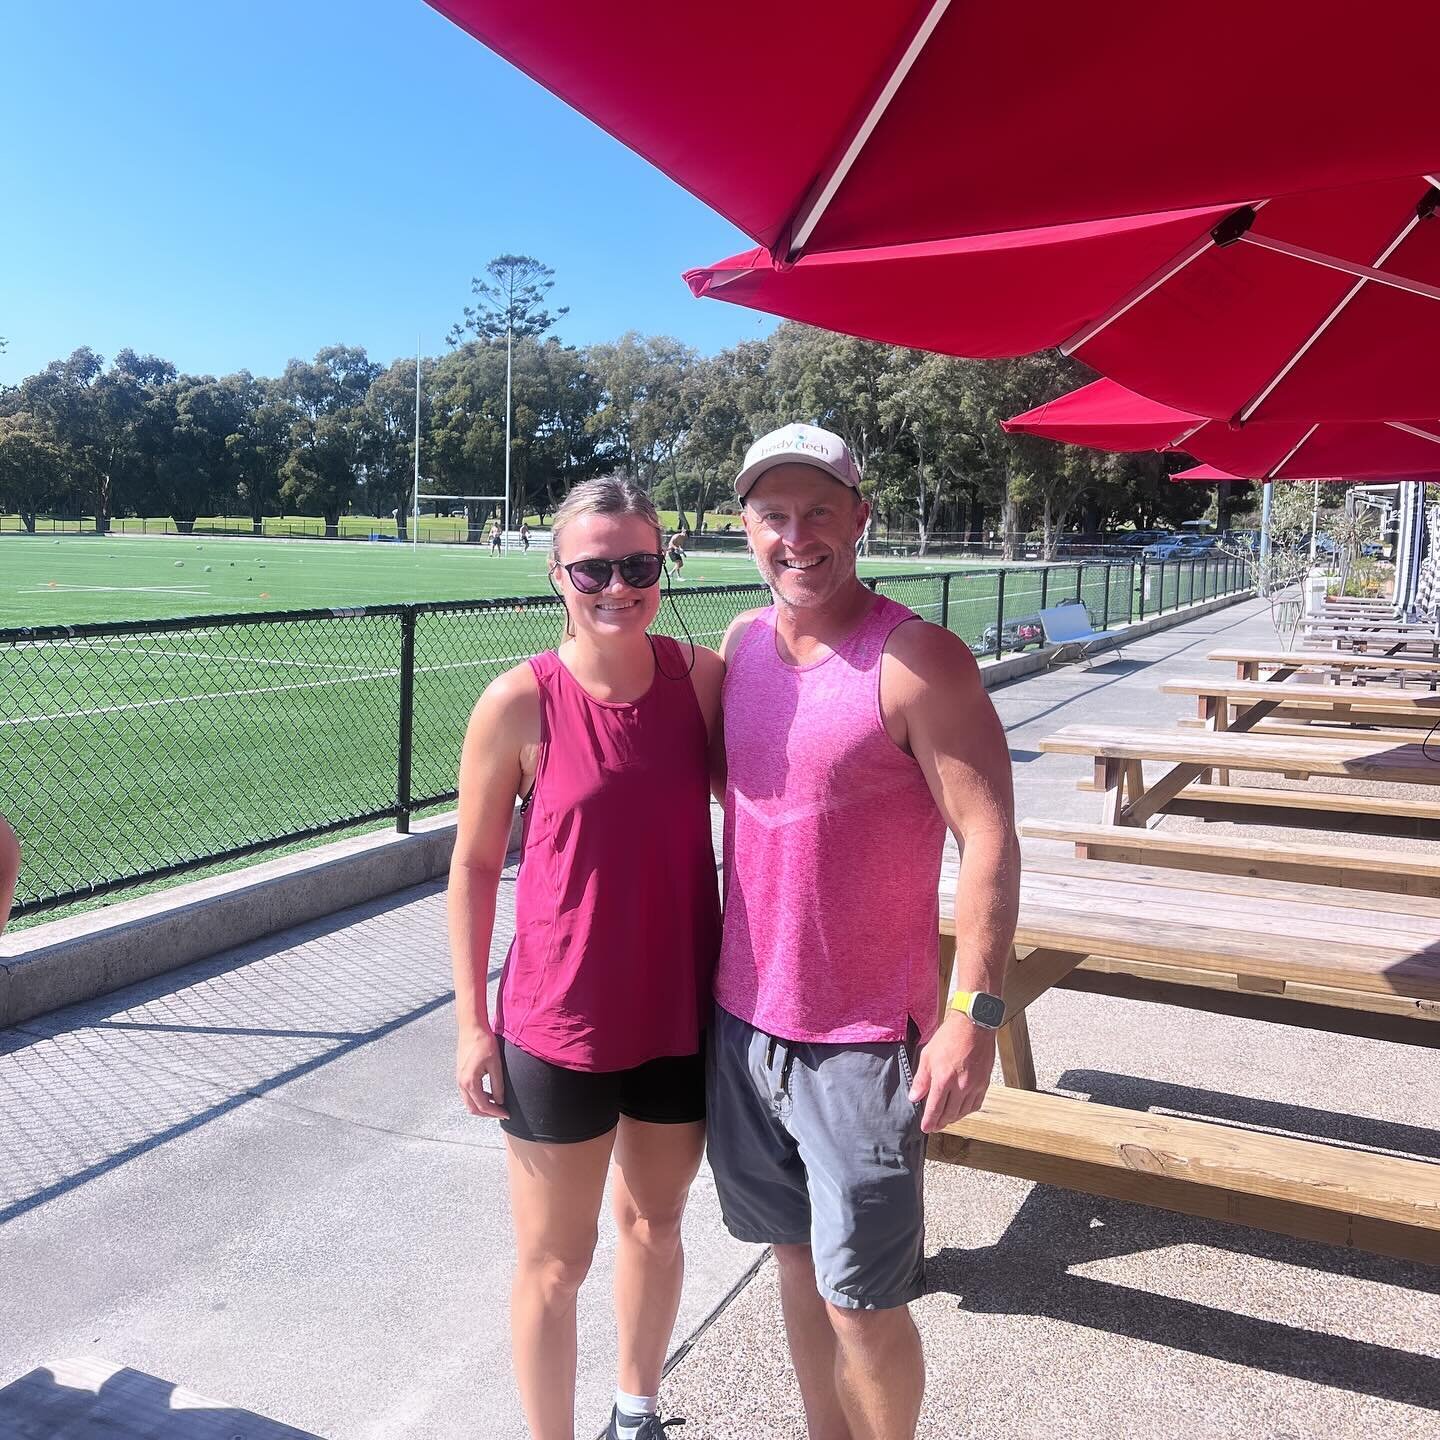 TWINNING

Did no one else get the pink Friday memo!?!? 😉

Nothing like some colour to ring in the long weekend. Go hard in your mammabolic session today ladies!